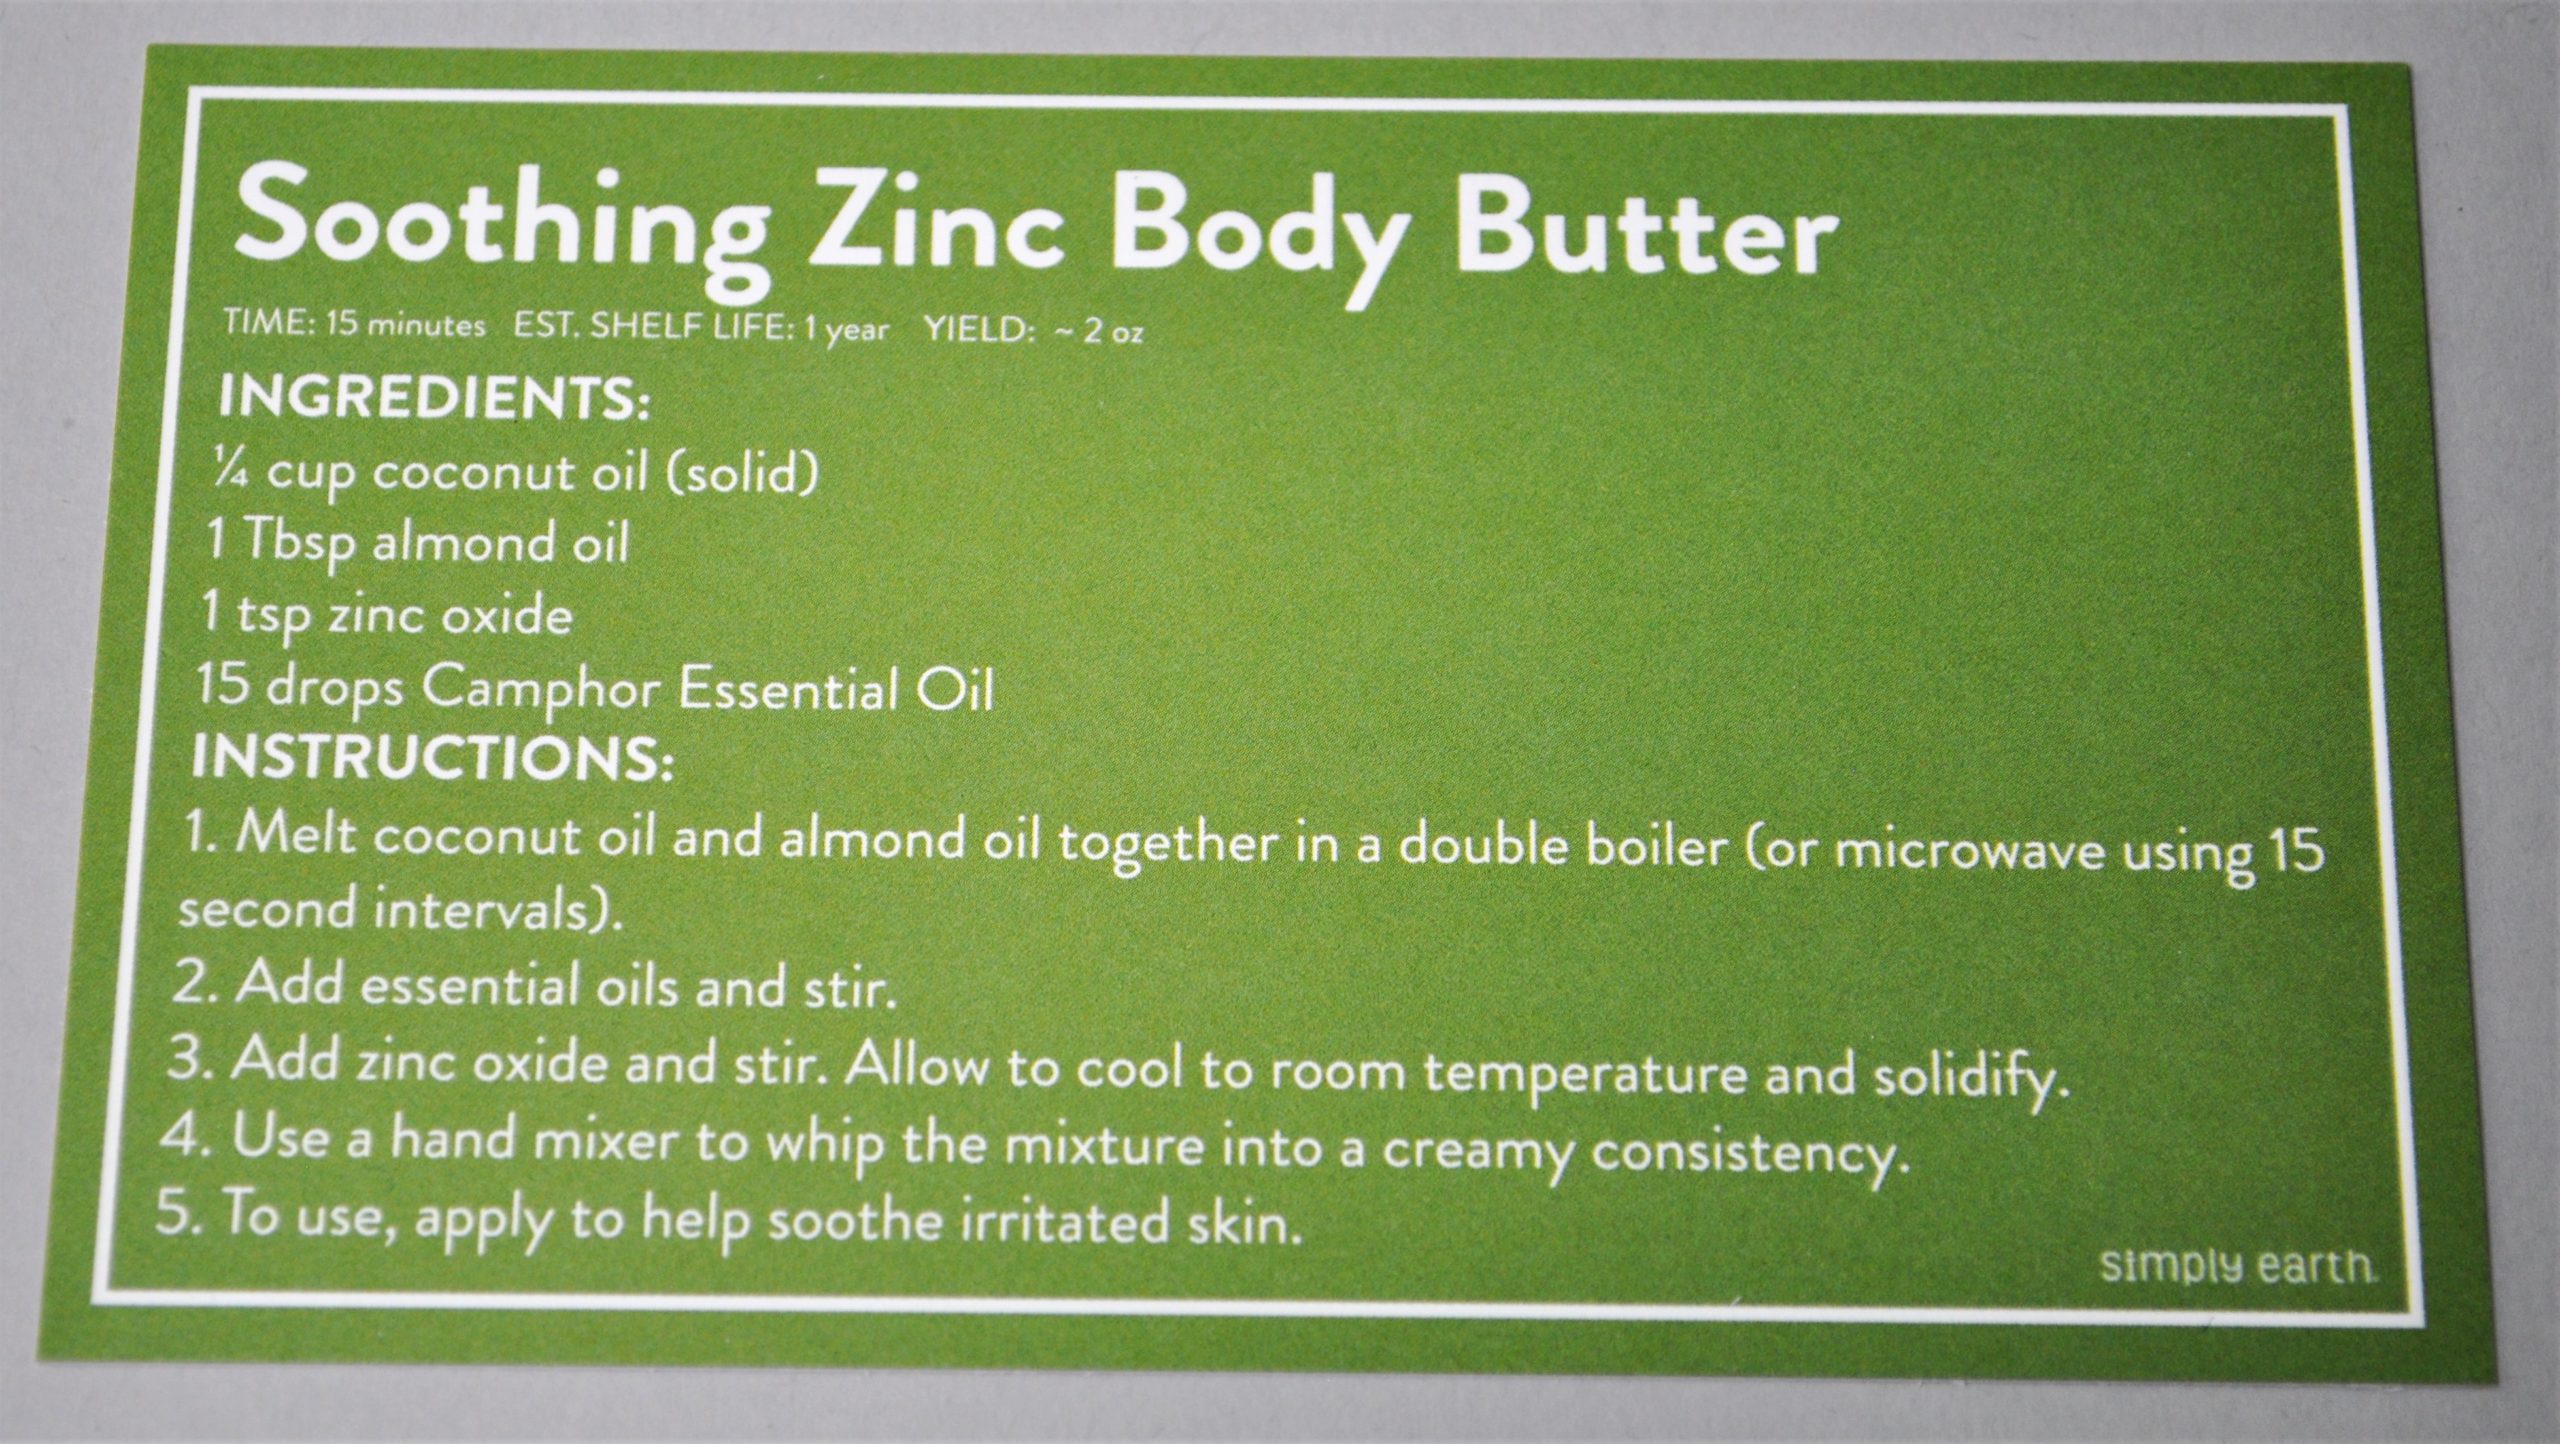 Soothing Zinc Body Butter Recipe Card